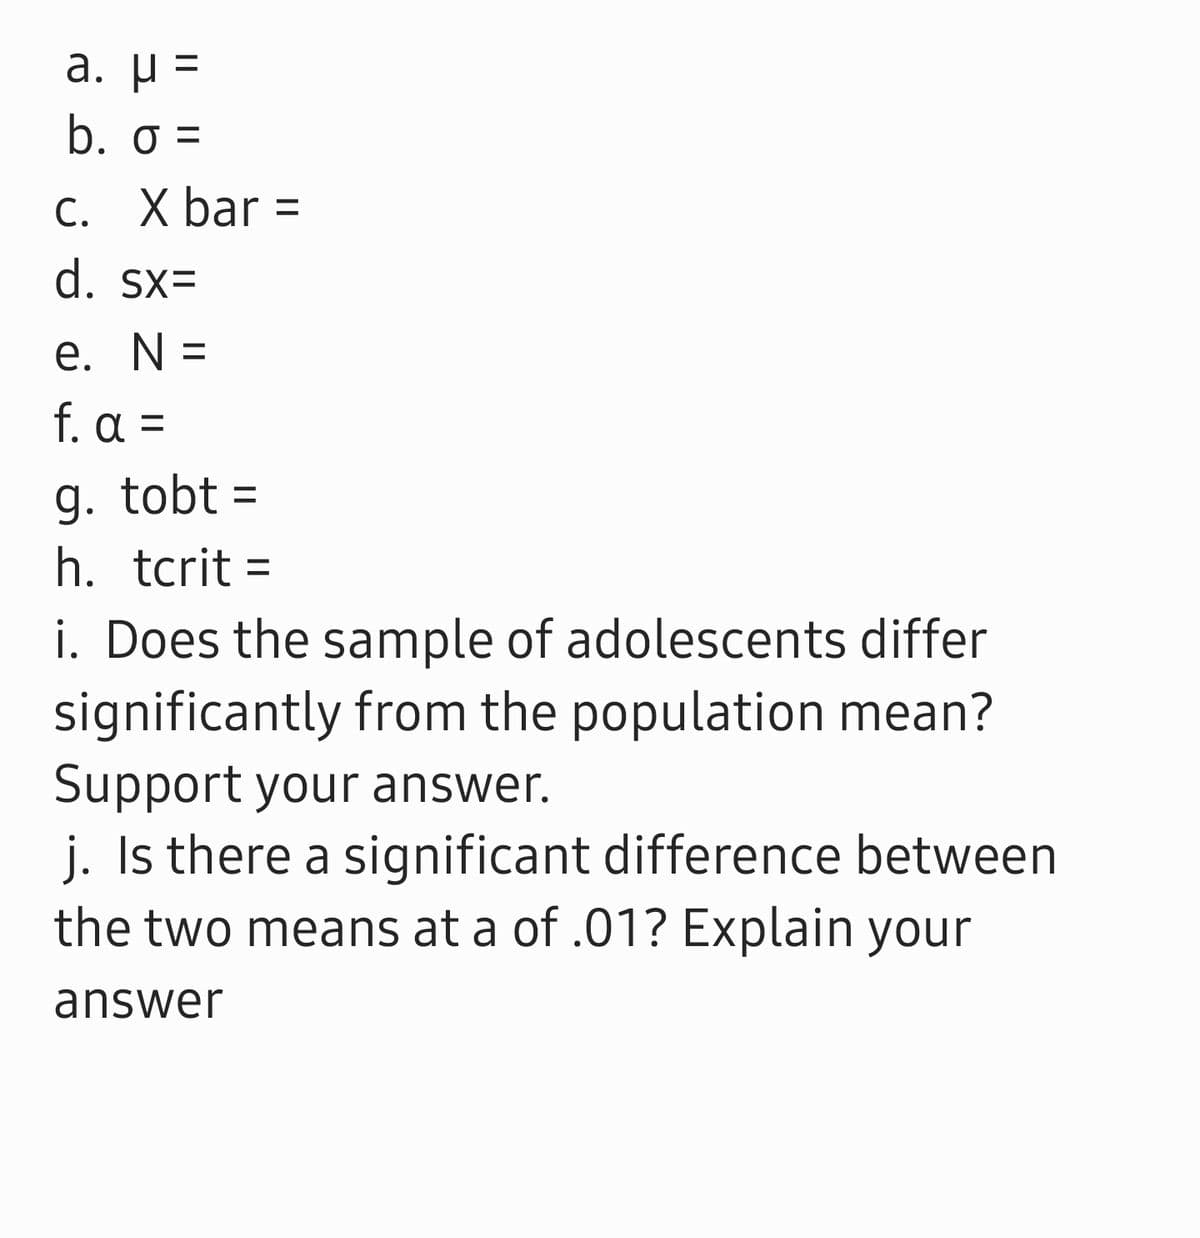 a. μ-
b. o =
C. X bar =
d. sx=
e. N =
f. α -
g. tobt =
h. tcrit =
i. Does the sample of adolescents differ
significantly from the population mean?
Support your answer.
j. Is there a significant difference between
the two means at a of .01? Explain your
answer
